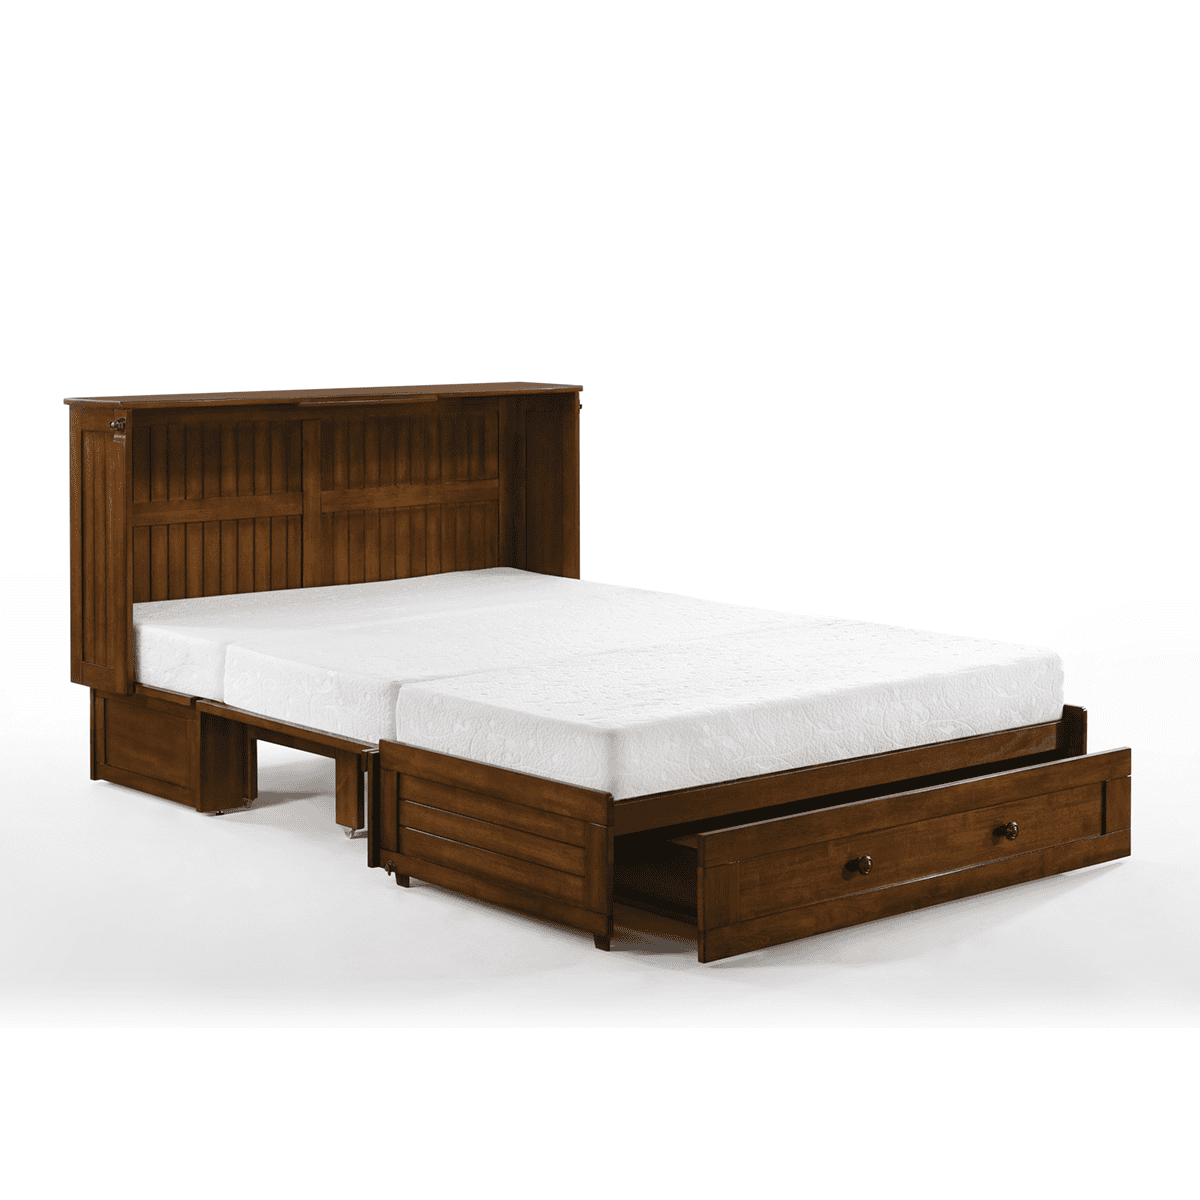 Daisy QUEEN Cabinet Bed FREE SHIPPING !!!